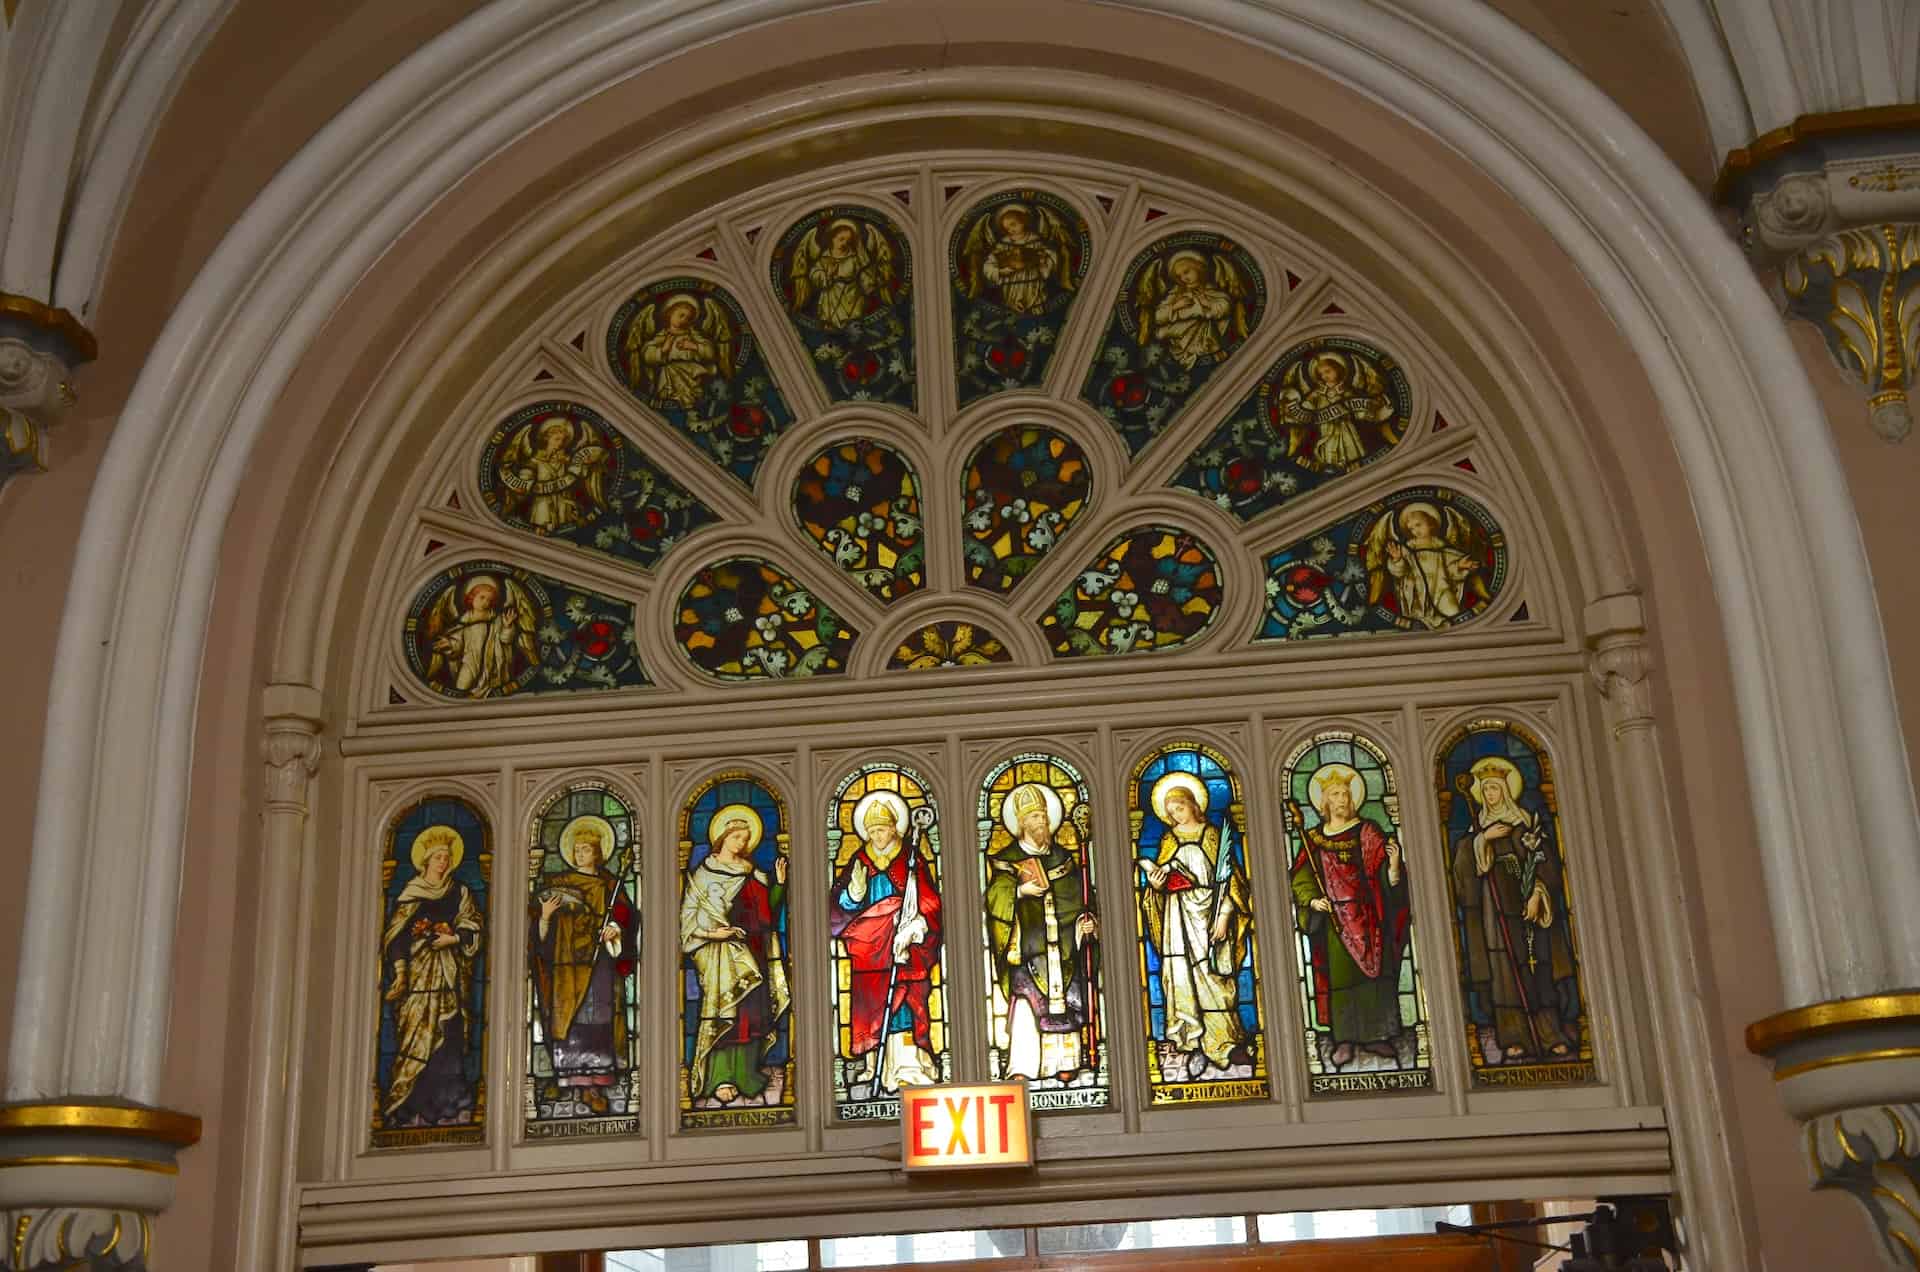 Stained glass windows at St. Michael's Church